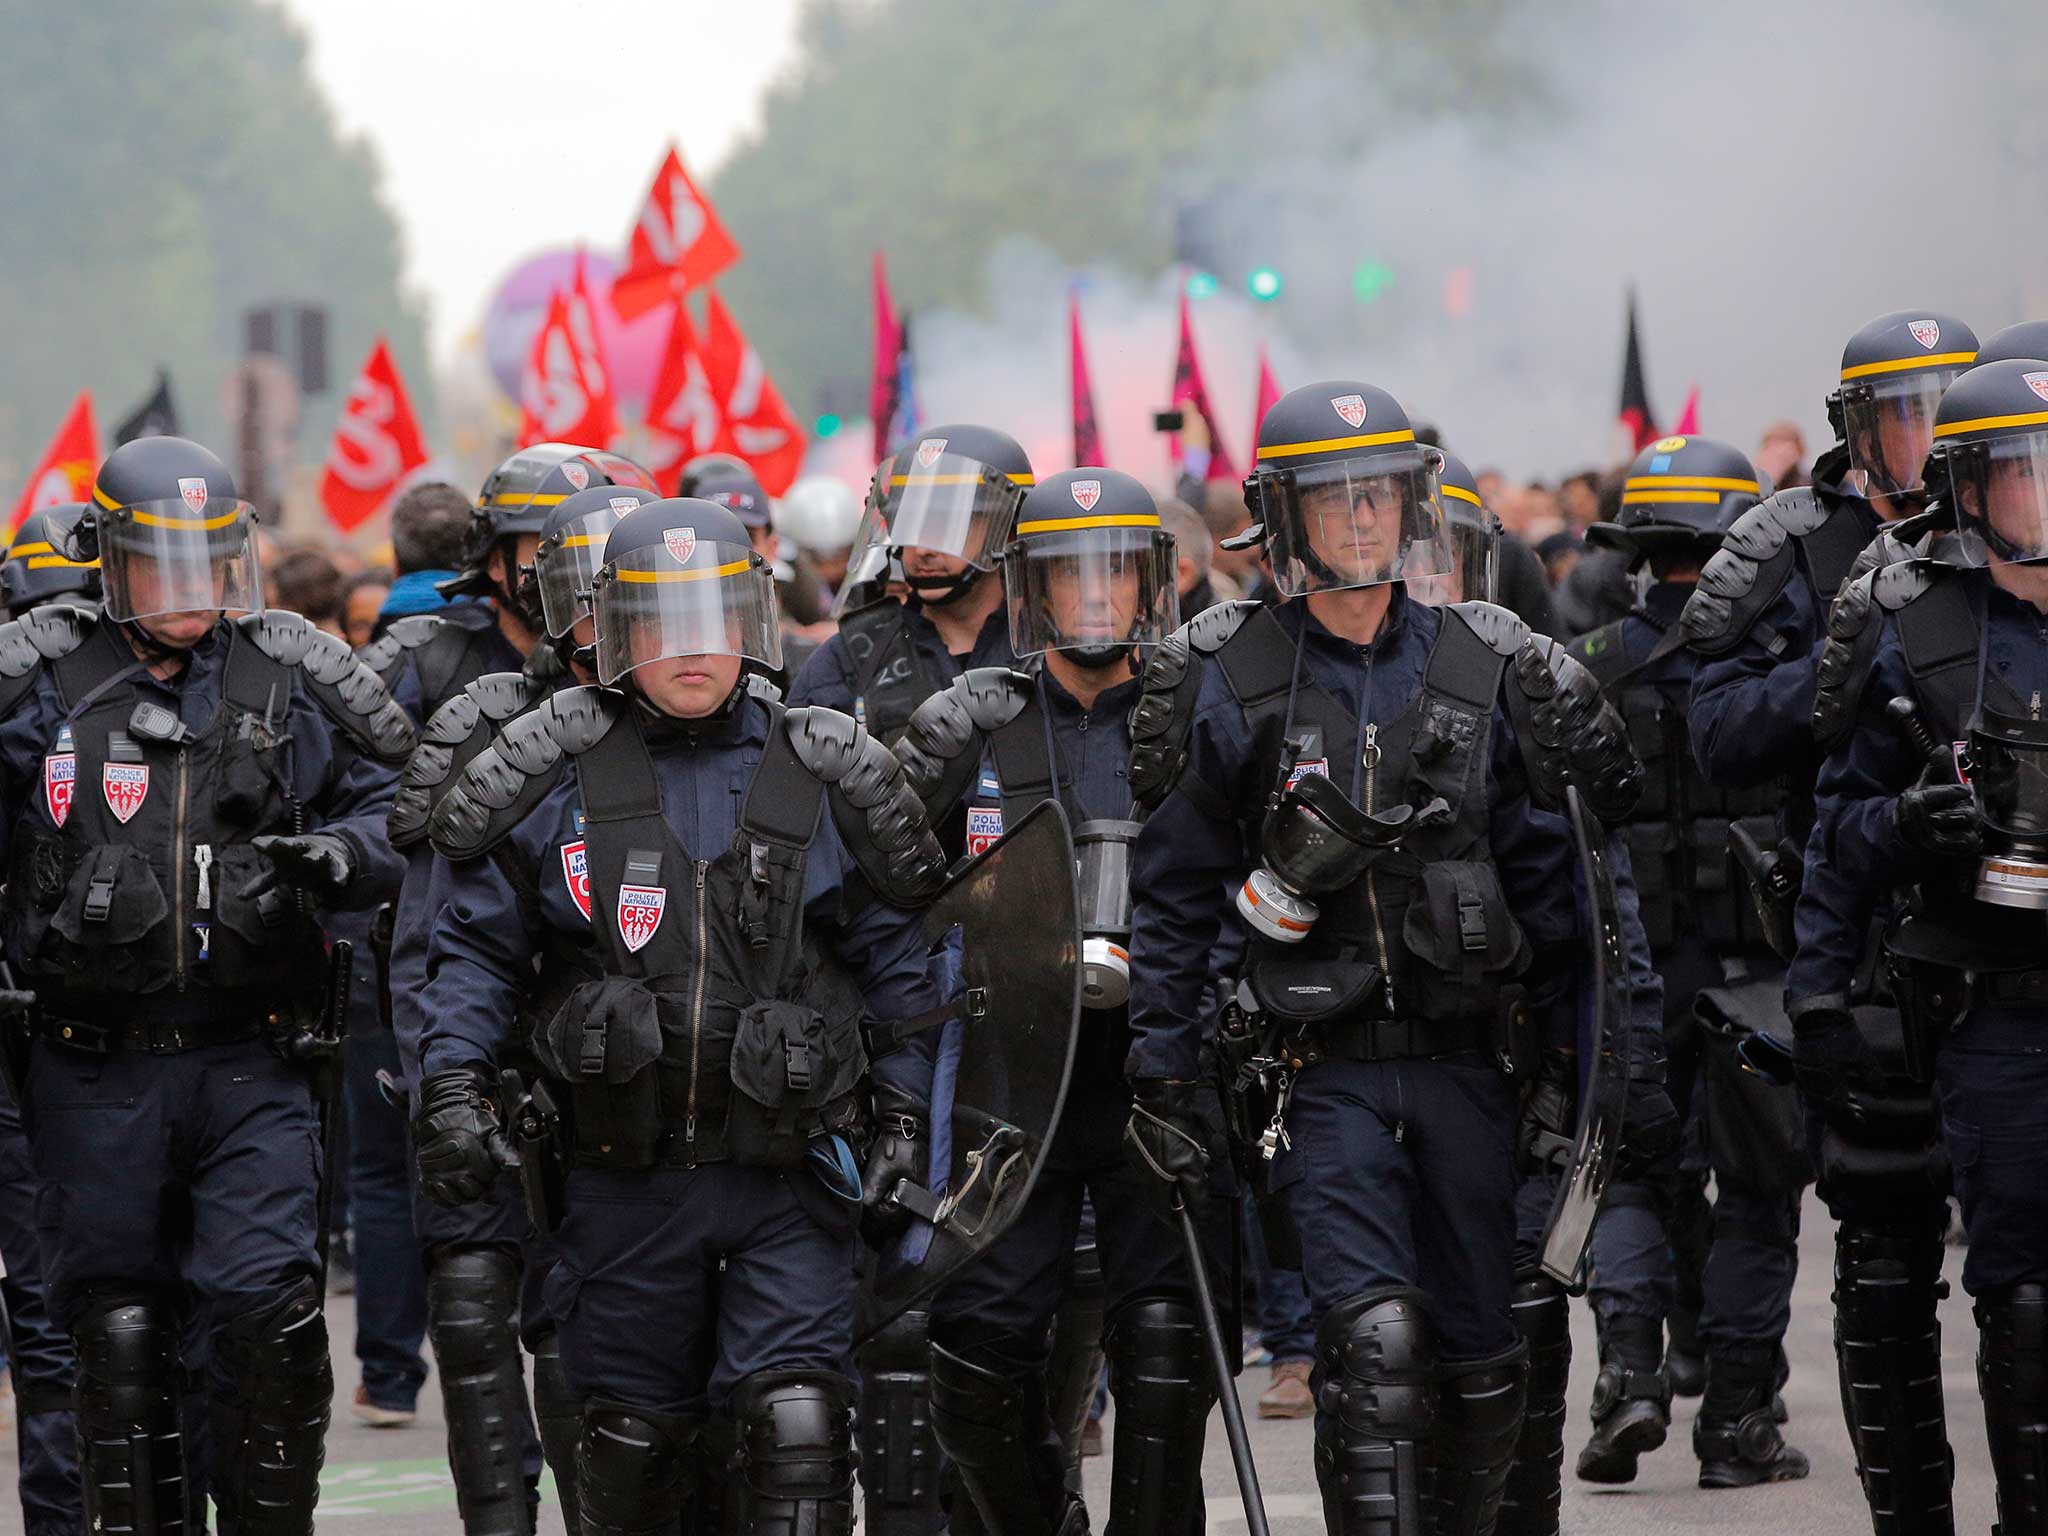 Riot police marched against protesters in the French capital